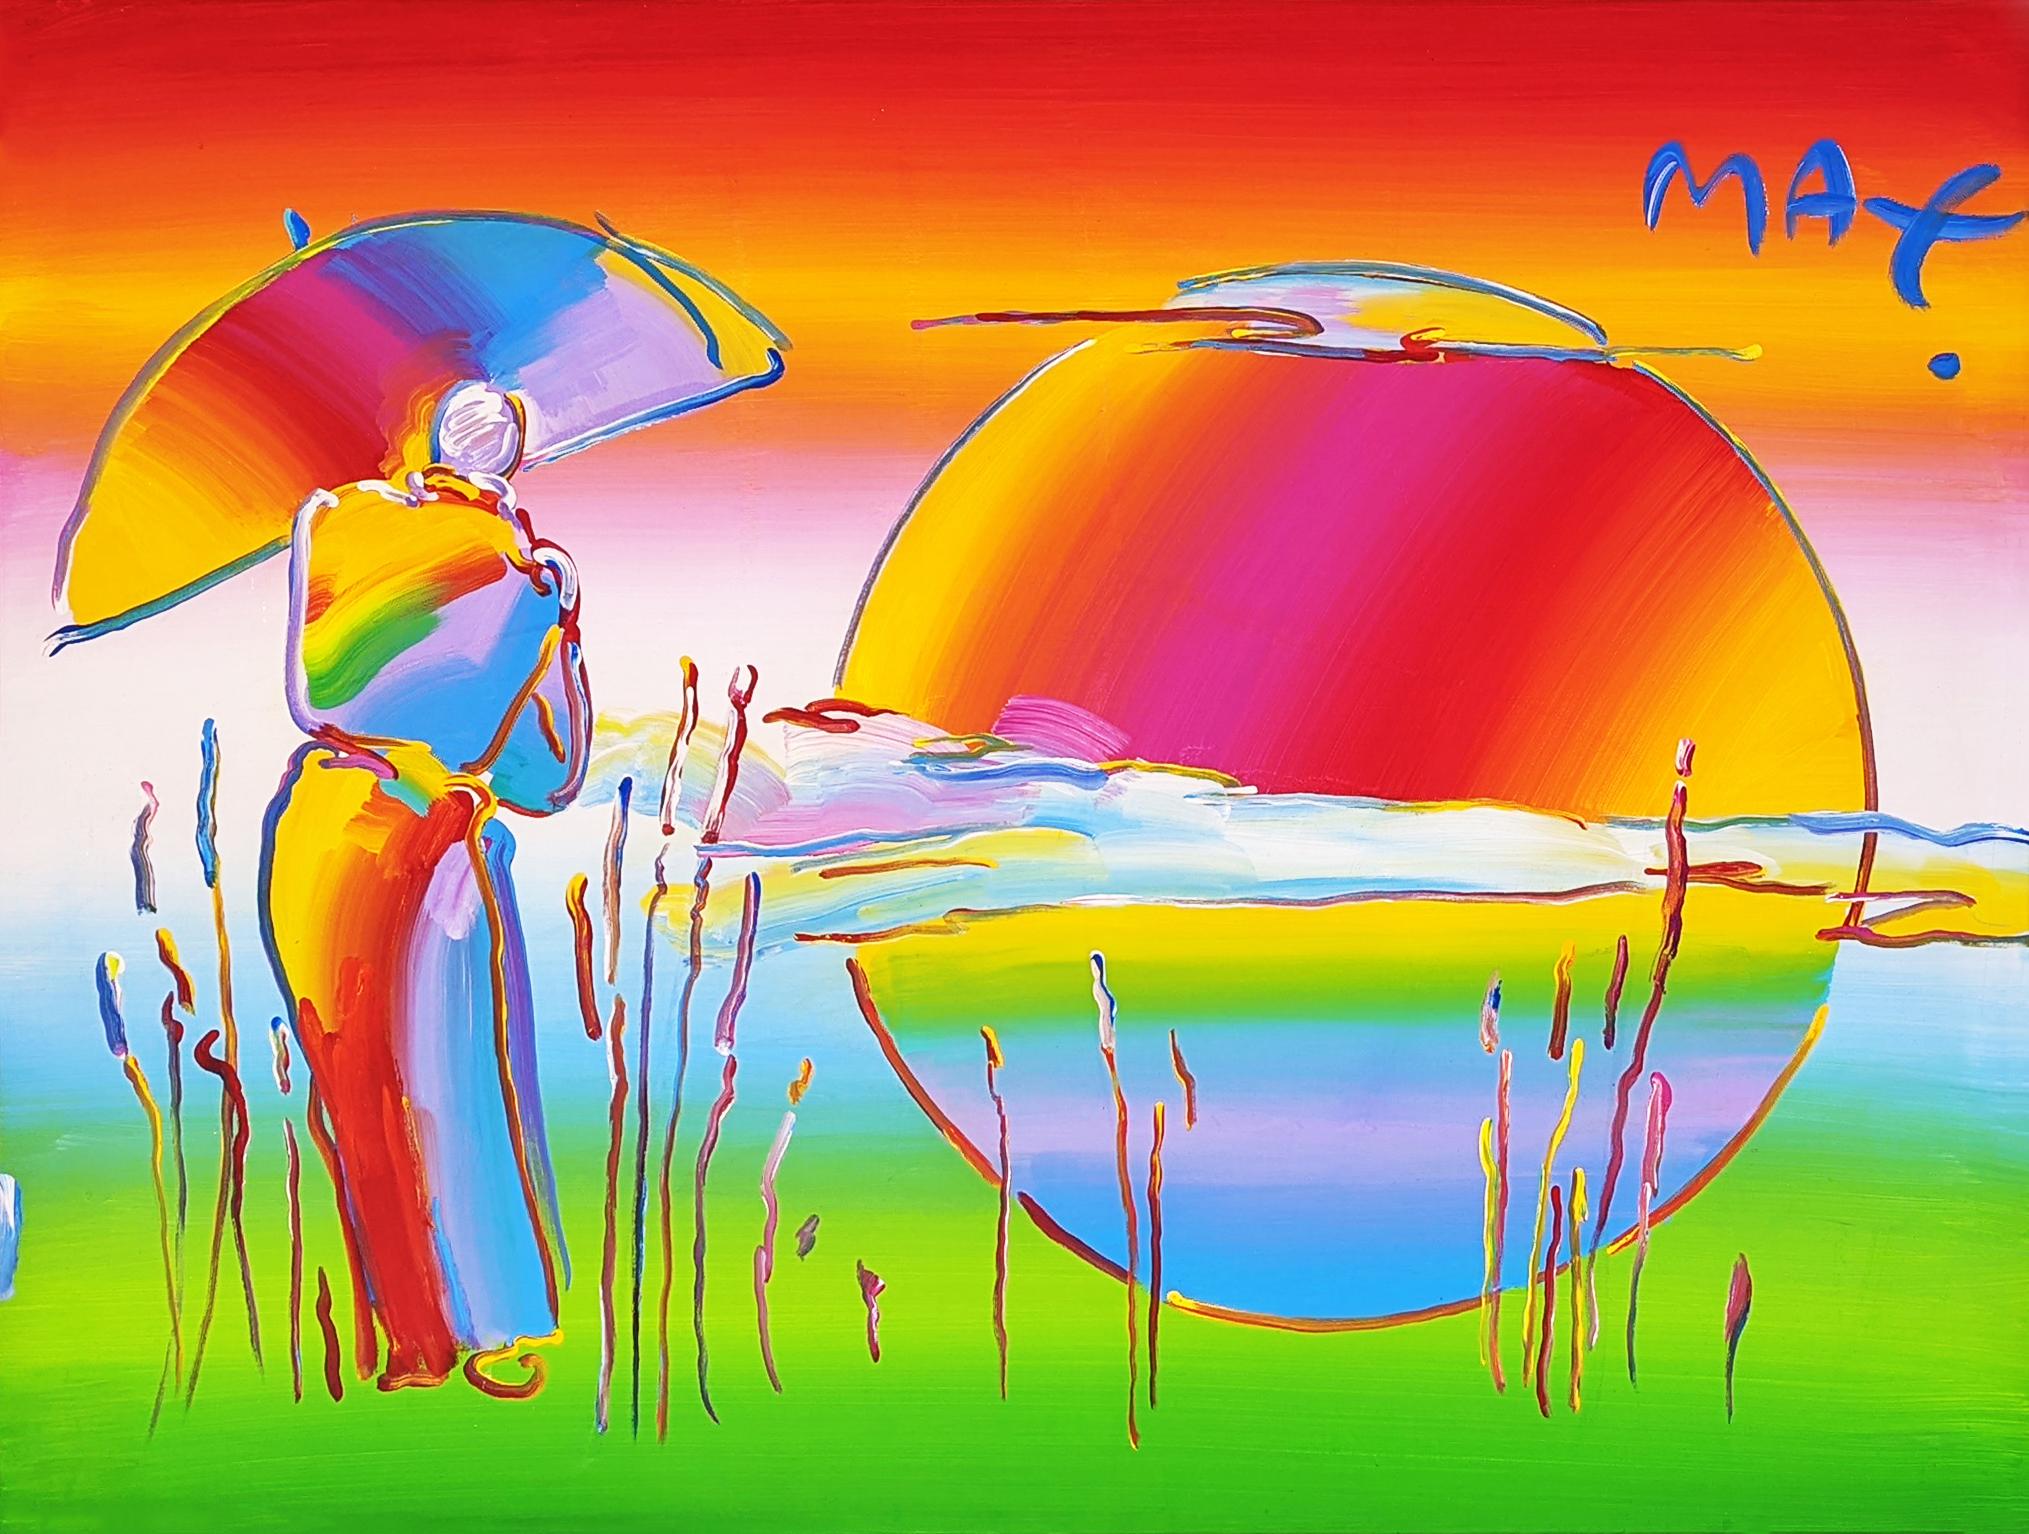 NEW MOON - Painting by Peter Max